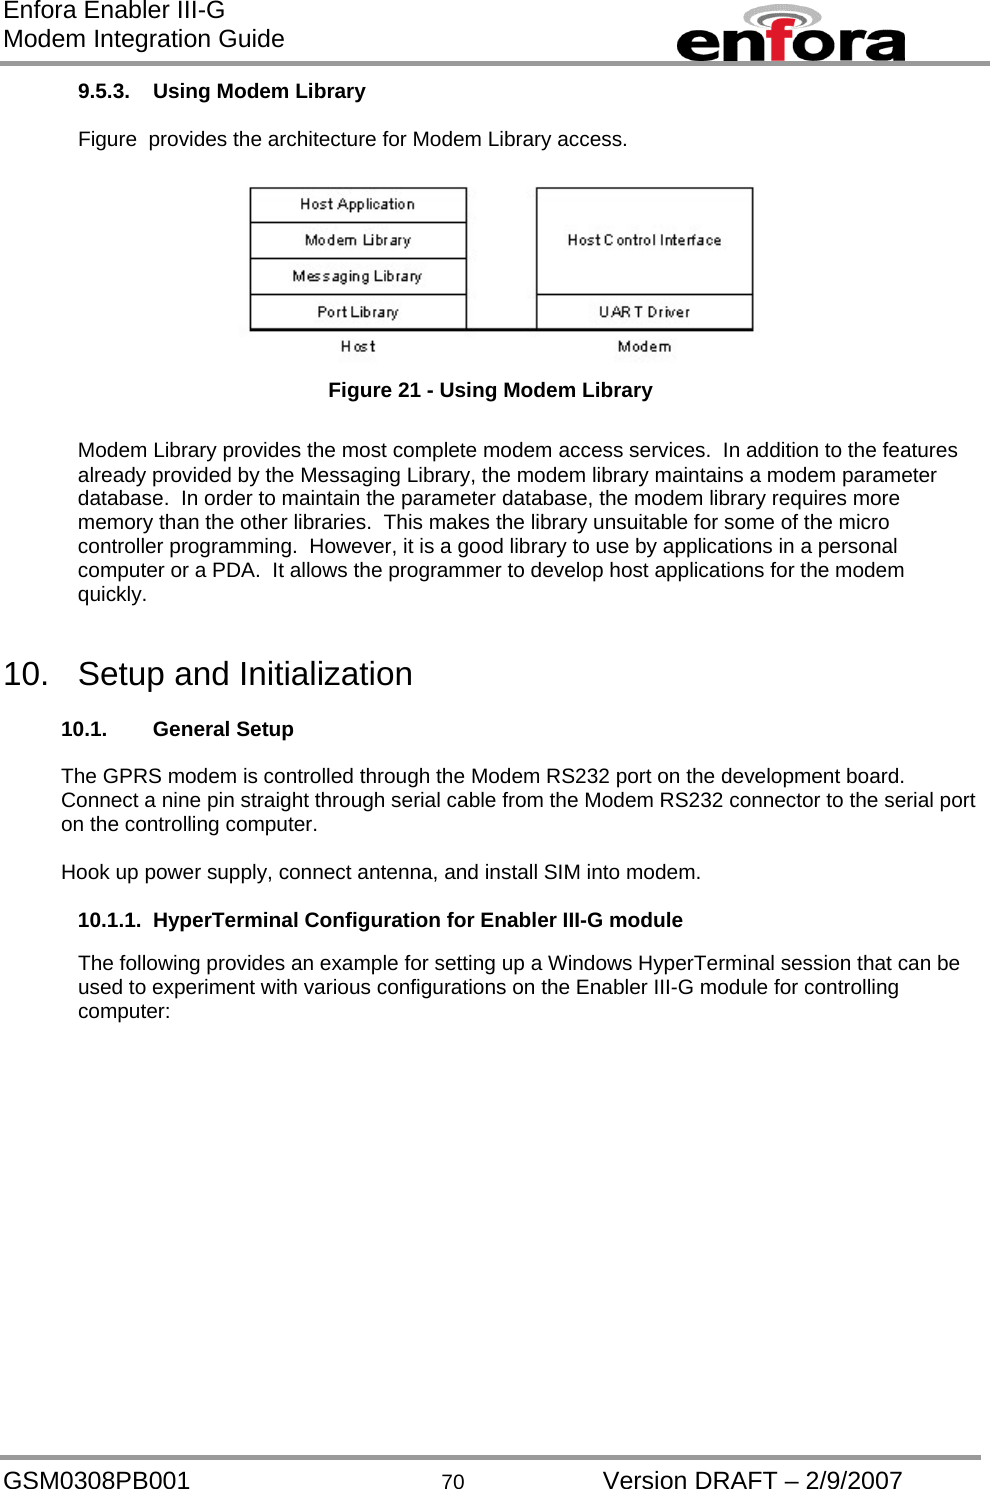 Enfora Enabler III-G Modem Integration Guide 9.5.3.  Using Modem Library   Figure  provides the architecture for Modem Library access.      Figure 21 - Using Modem Library  Modem Library provides the most complete modem access services.  In addition to the features already provided by the Messaging Library, the modem library maintains a modem parameter database.  In order to maintain the parameter database, the modem library requires more memory than the other libraries.  This makes the library unsuitable for some of the micro controller programming.  However, it is a good library to use by applications in a personal computer or a PDA.  It allows the programmer to develop host applications for the modem quickly.   10.  Setup and Initialization  10.1. General Setup  The GPRS modem is controlled through the Modem RS232 port on the development board.  Connect a nine pin straight through serial cable from the Modem RS232 connector to the serial port on the controlling computer.  Hook up power supply, connect antenna, and install SIM into modem.  10.1.1. HyperTerminal Configuration for Enabler III-G module  The following provides an example for setting up a Windows HyperTerminal session that can be used to experiment with various configurations on the Enabler III-G module for controlling computer: GSM0308PB001  70  Version DRAFT – 2/9/2007 